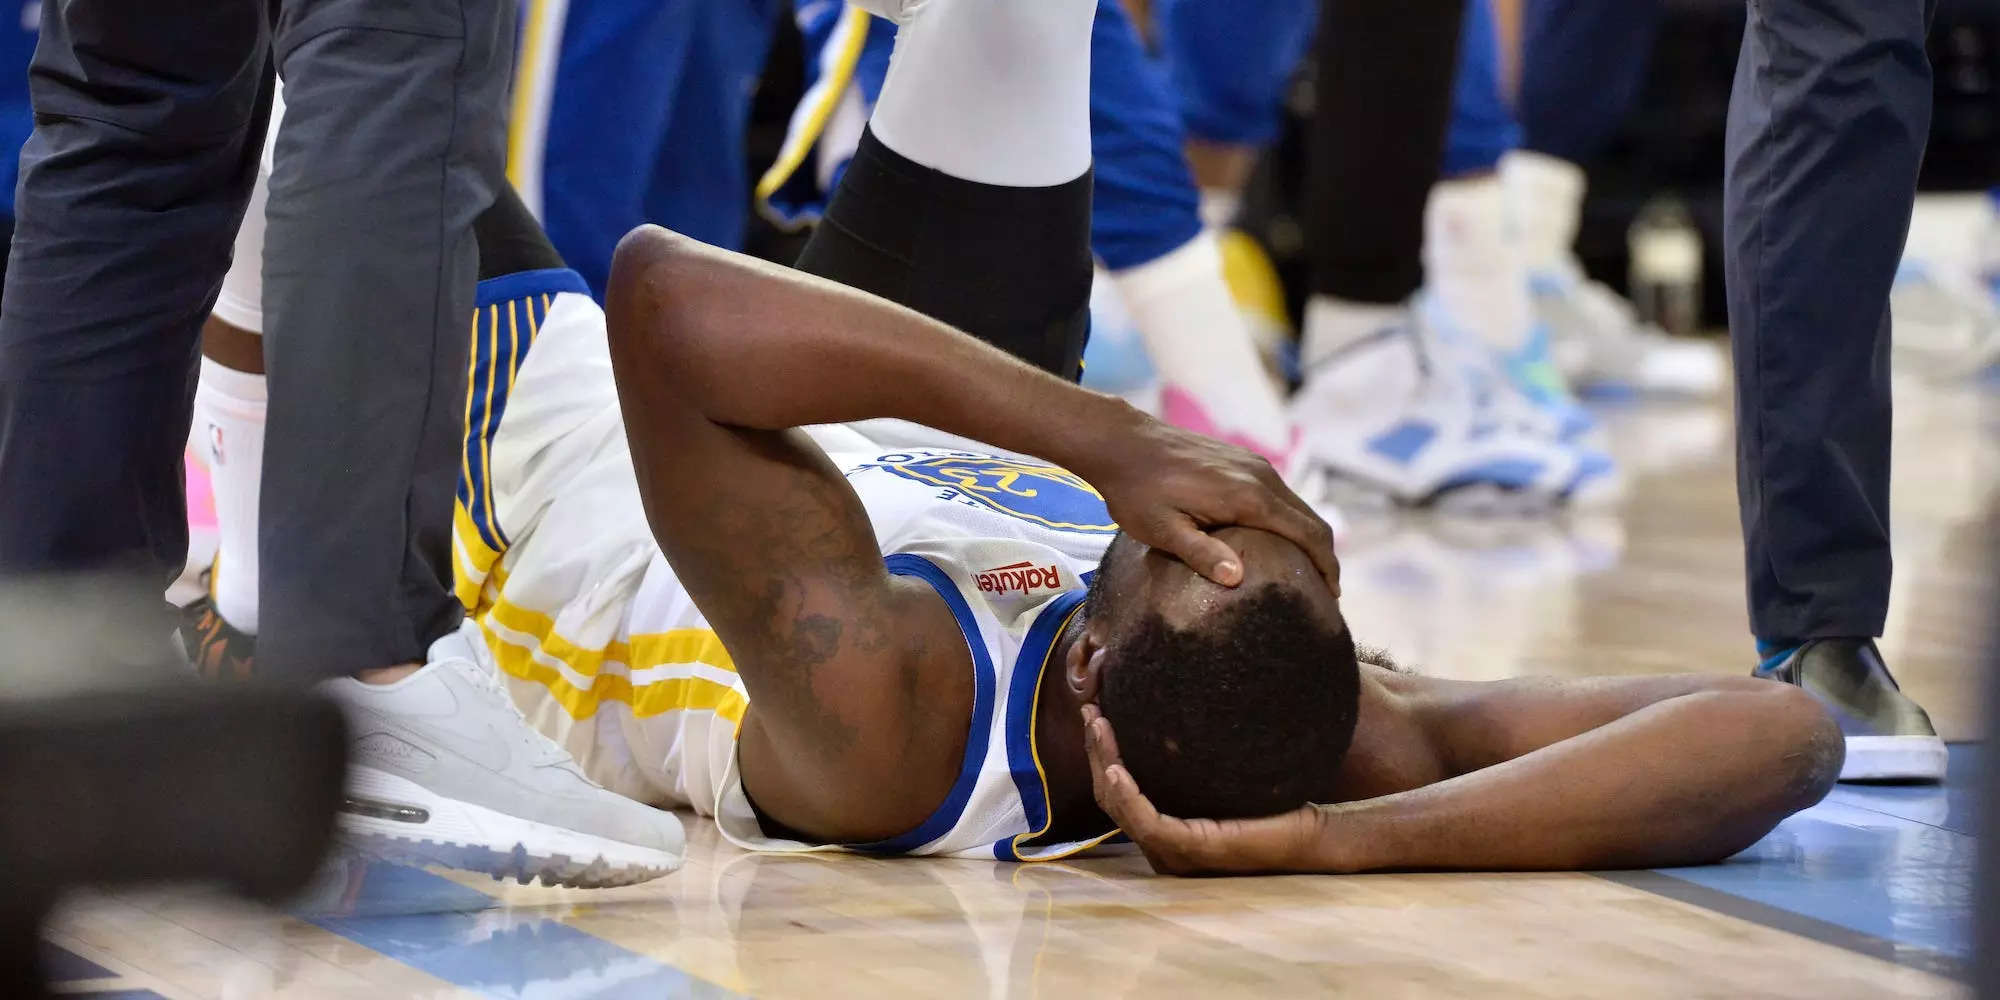 Draymond Green lays on the ground and covers his face after getting hit.